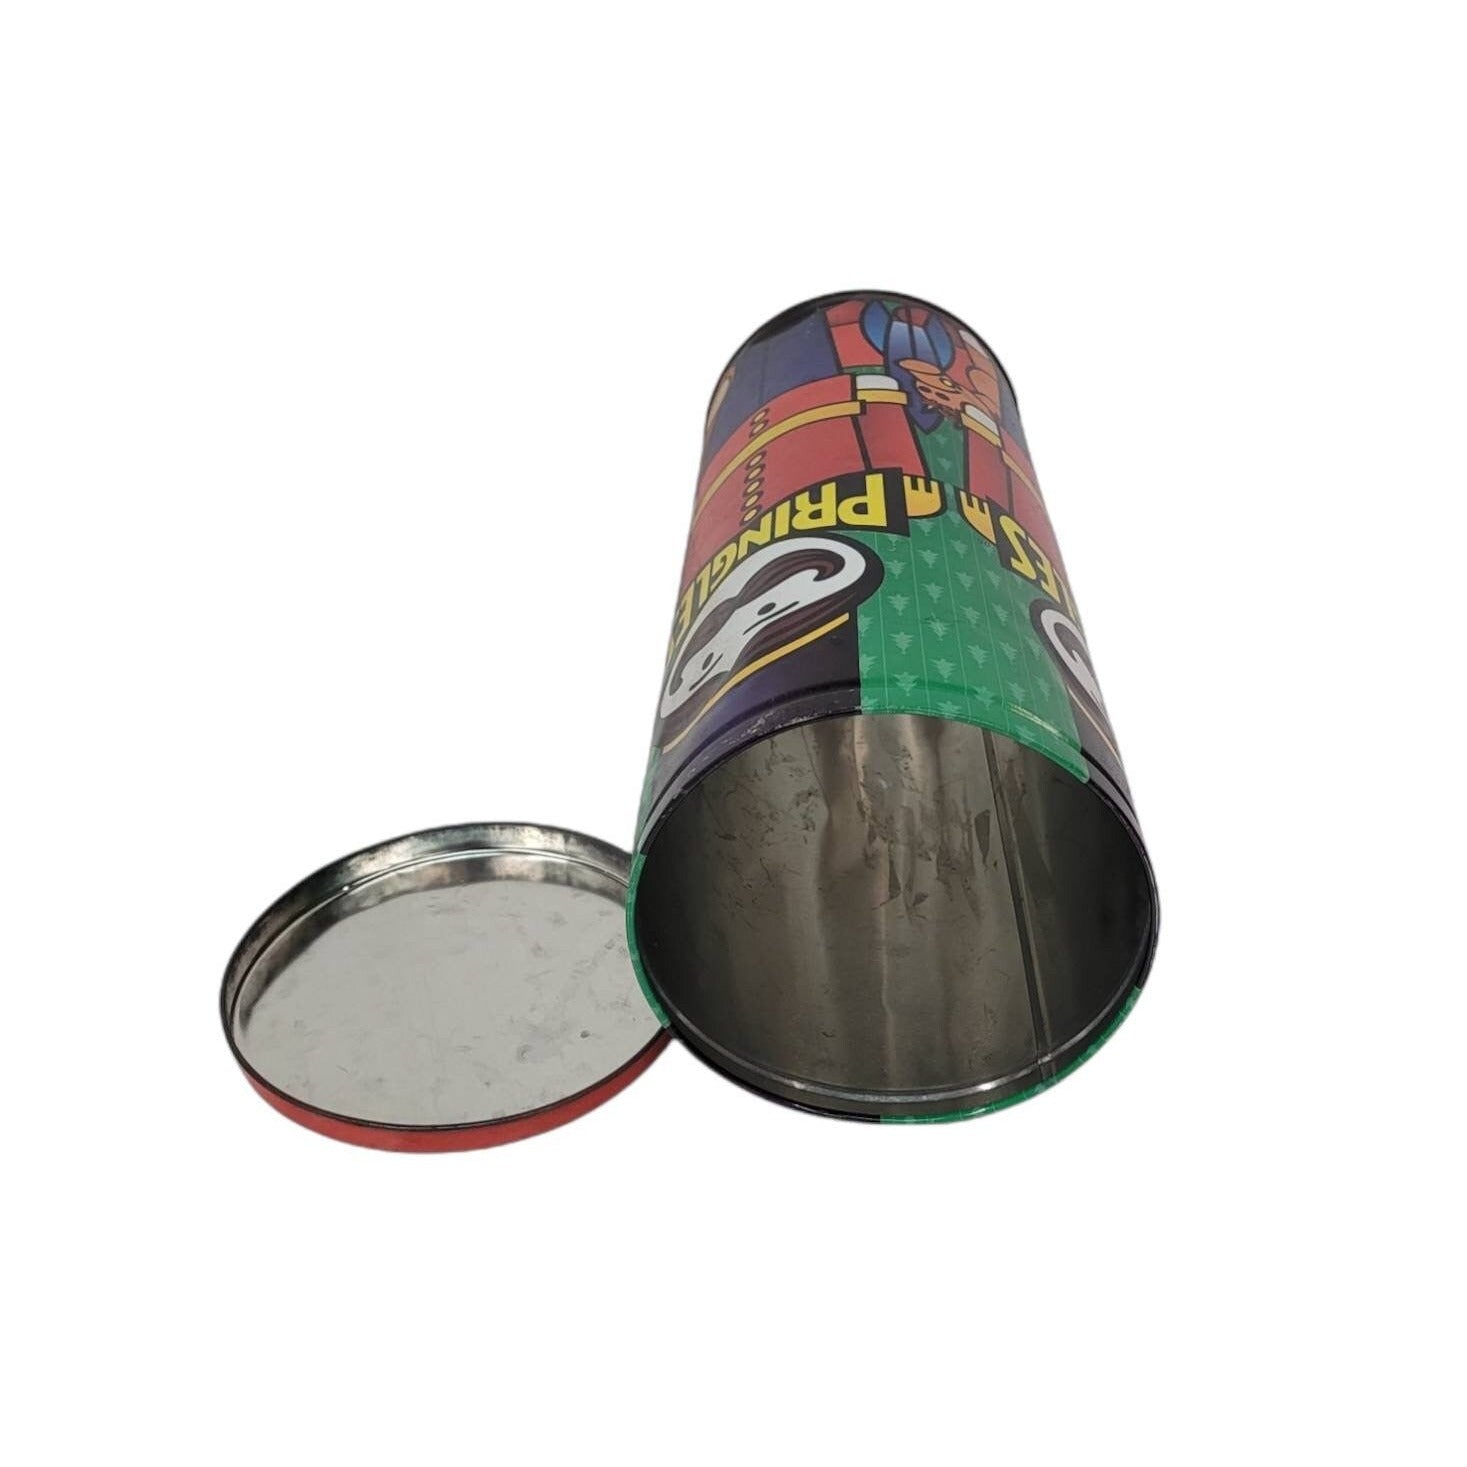 large pringle can christmas tin cookie container